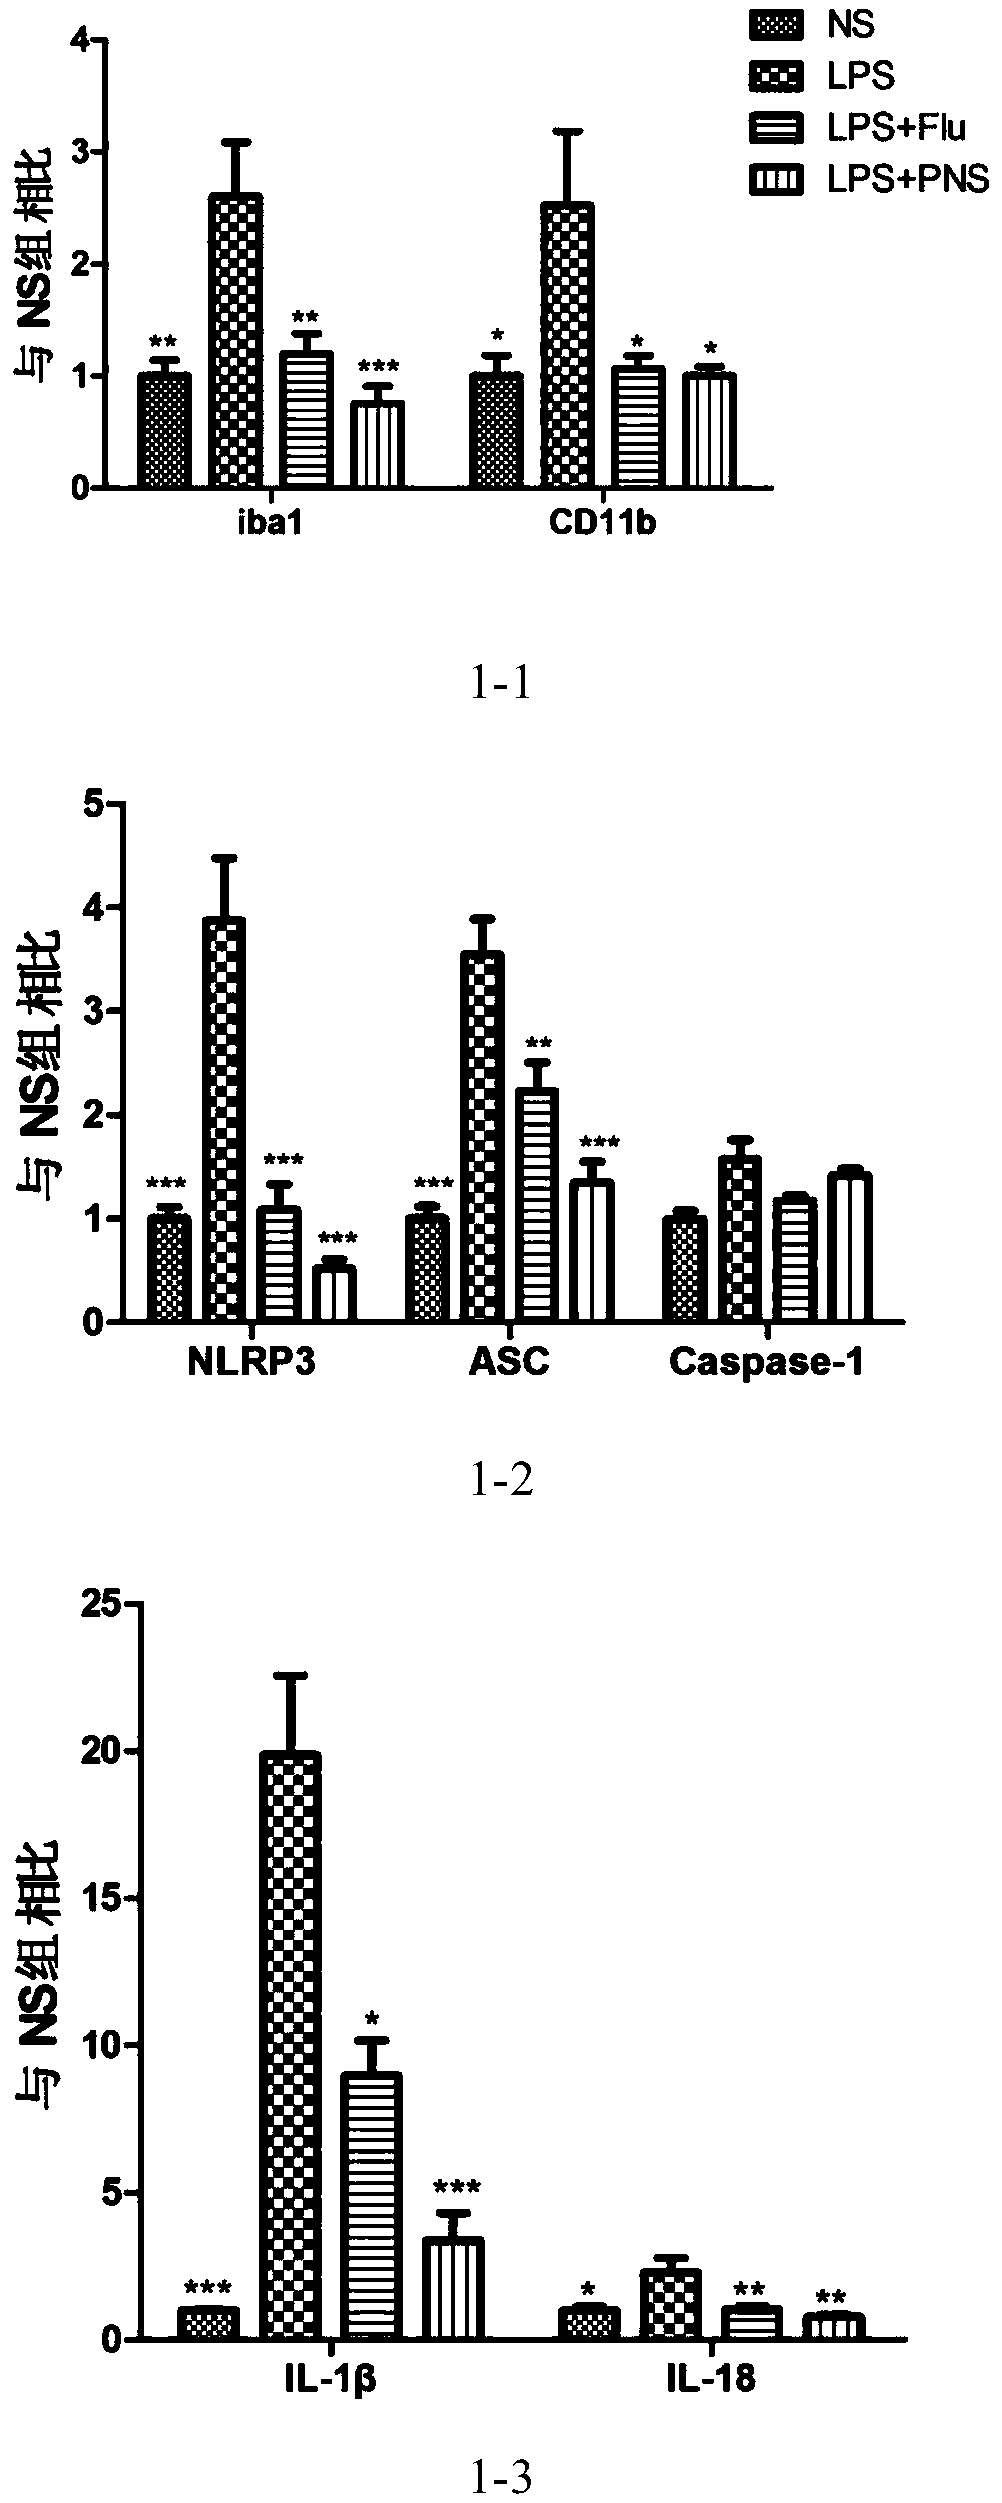 Application of panax notoginseng saponins in preparing NLRP3 inflammasome-restraining drugs or drugs for treating tristimania